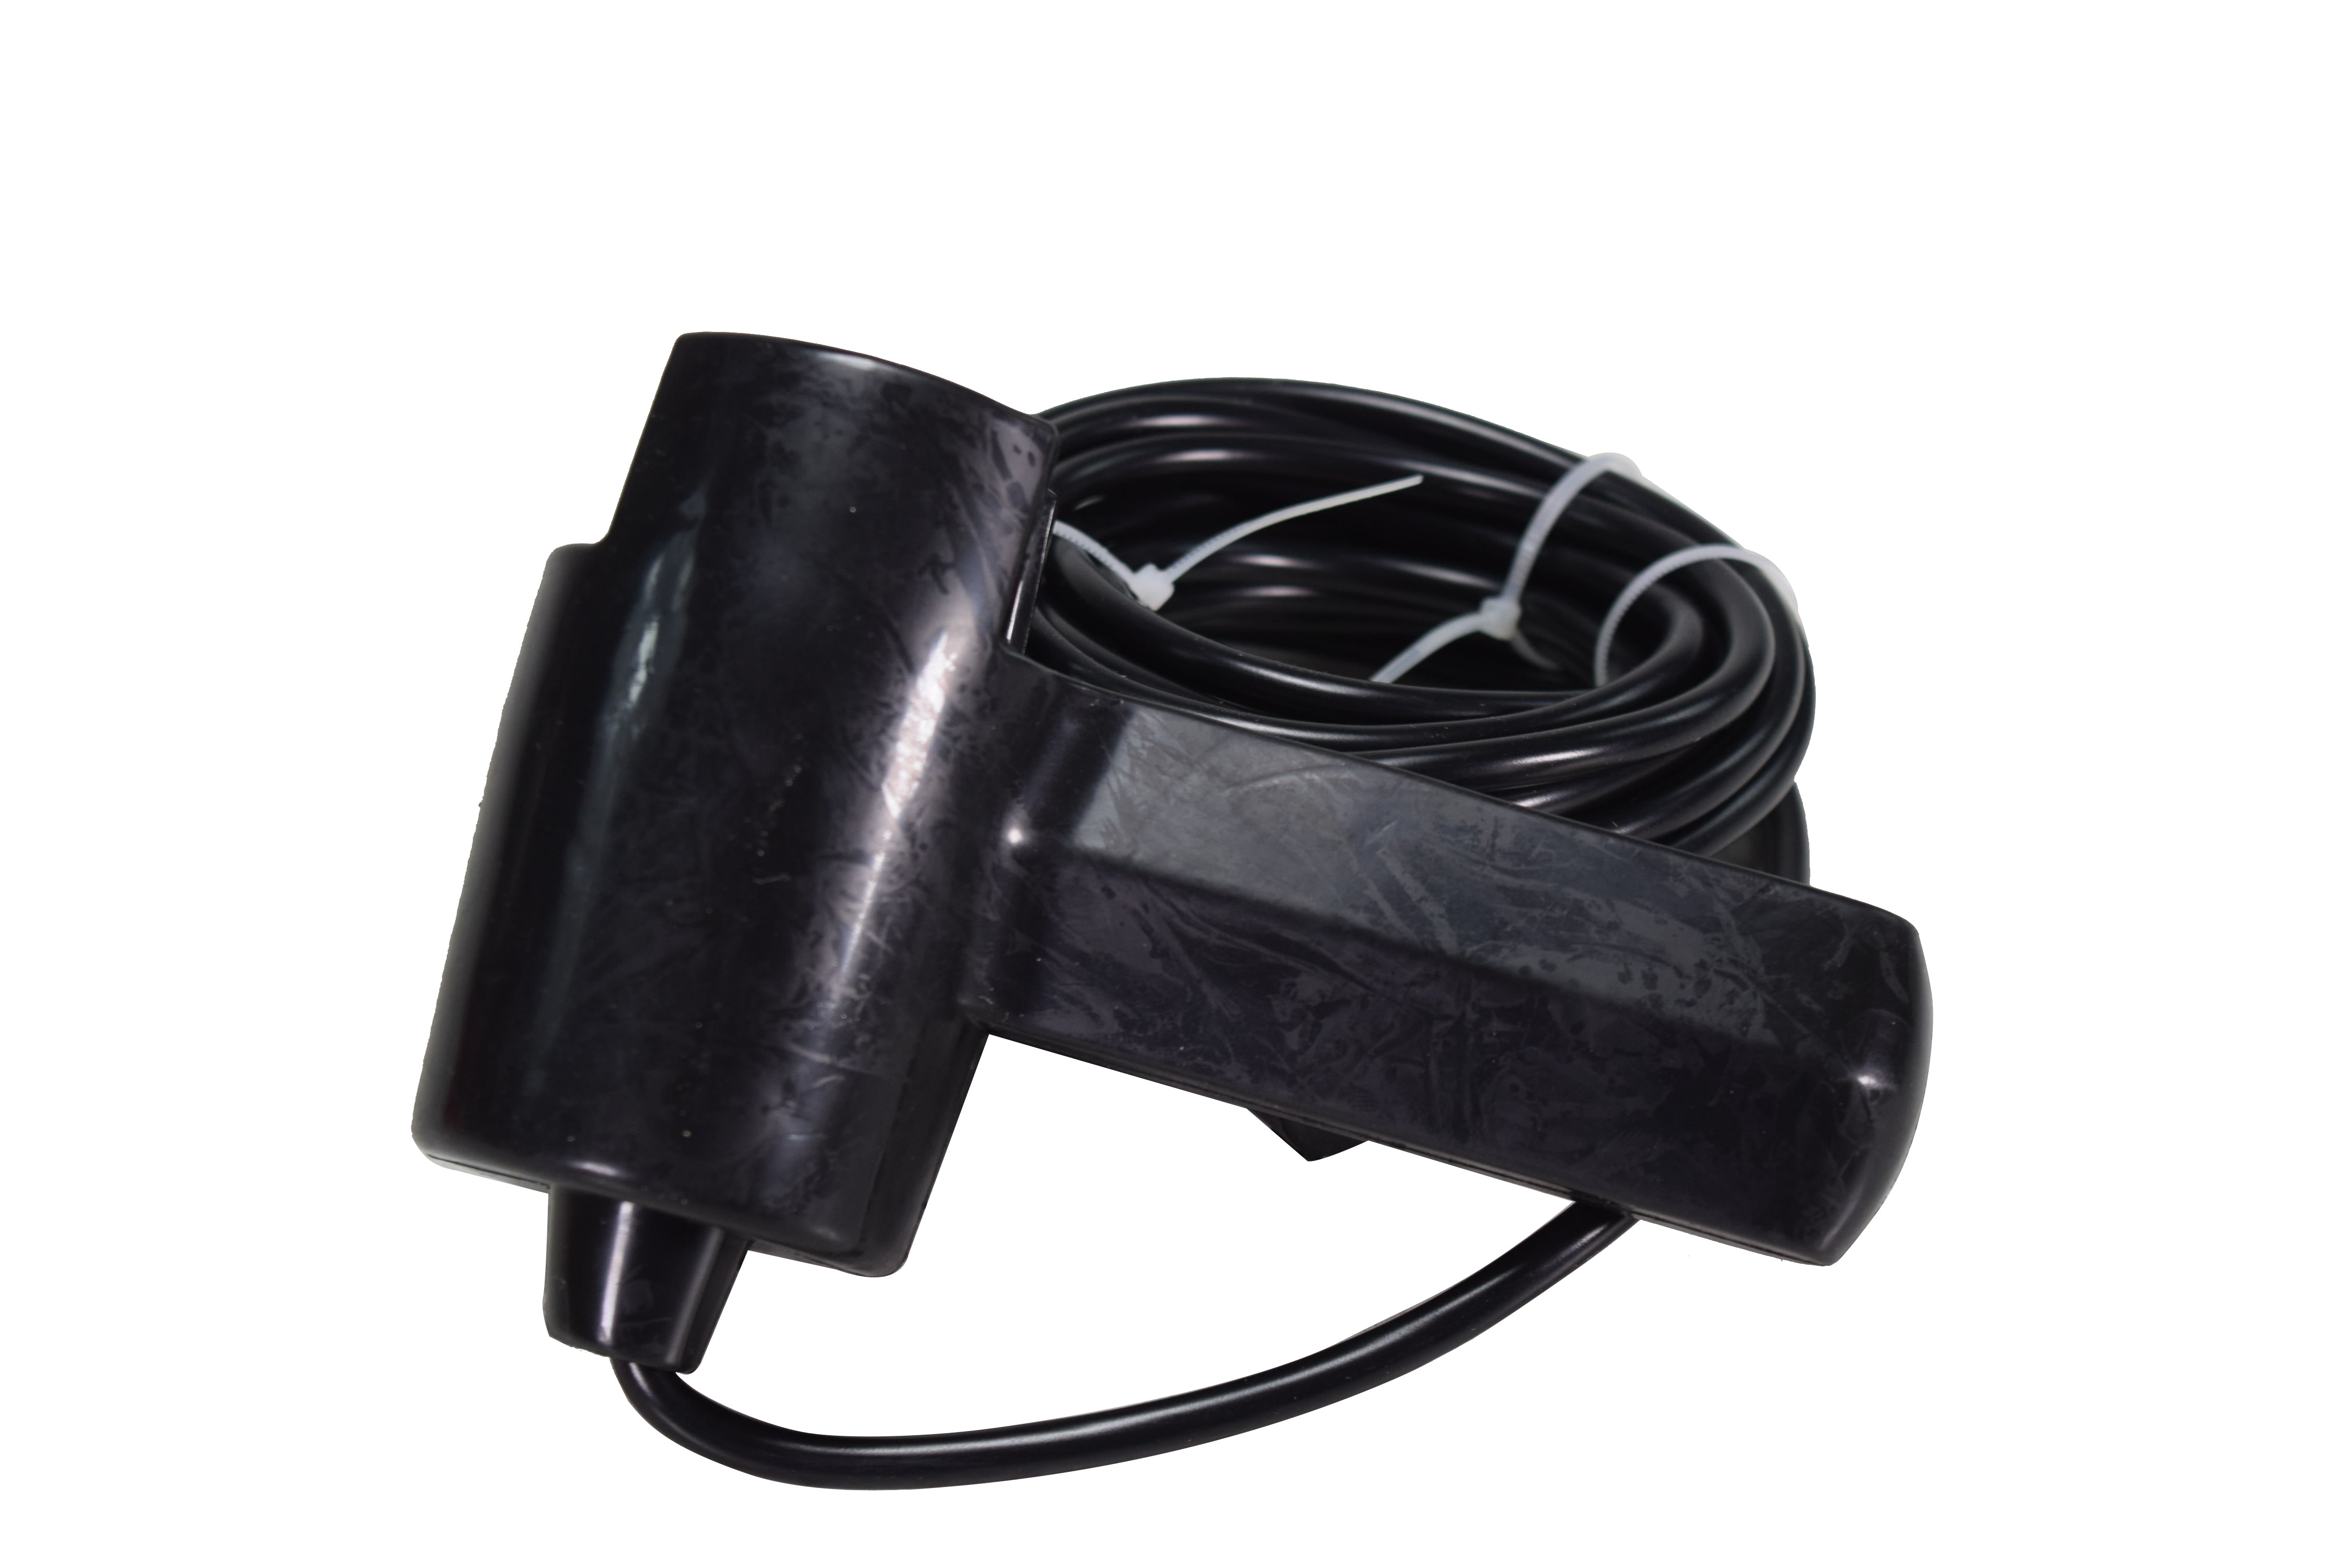 WARN-99963-5000-DC-Series-12V-Electric-Utility-Winch-CE-image-6